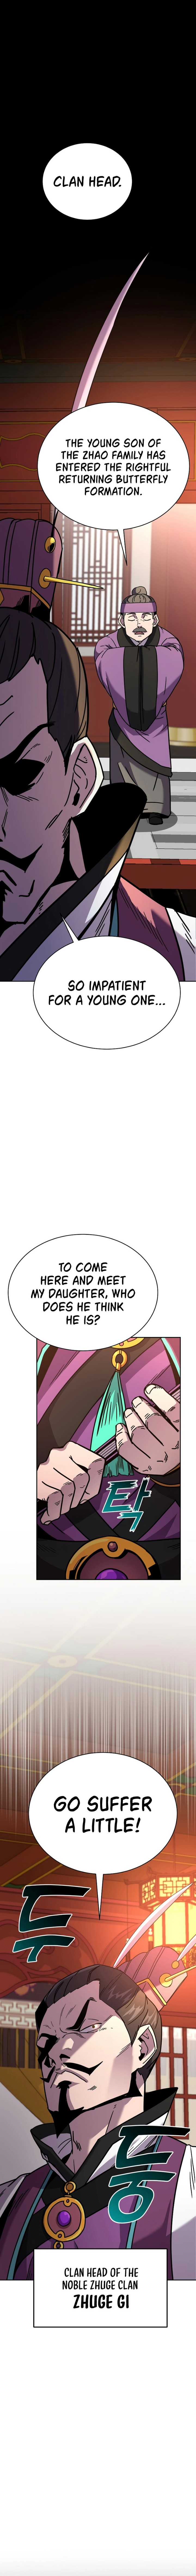 Martial Streamer - Chapter 8 Page 1